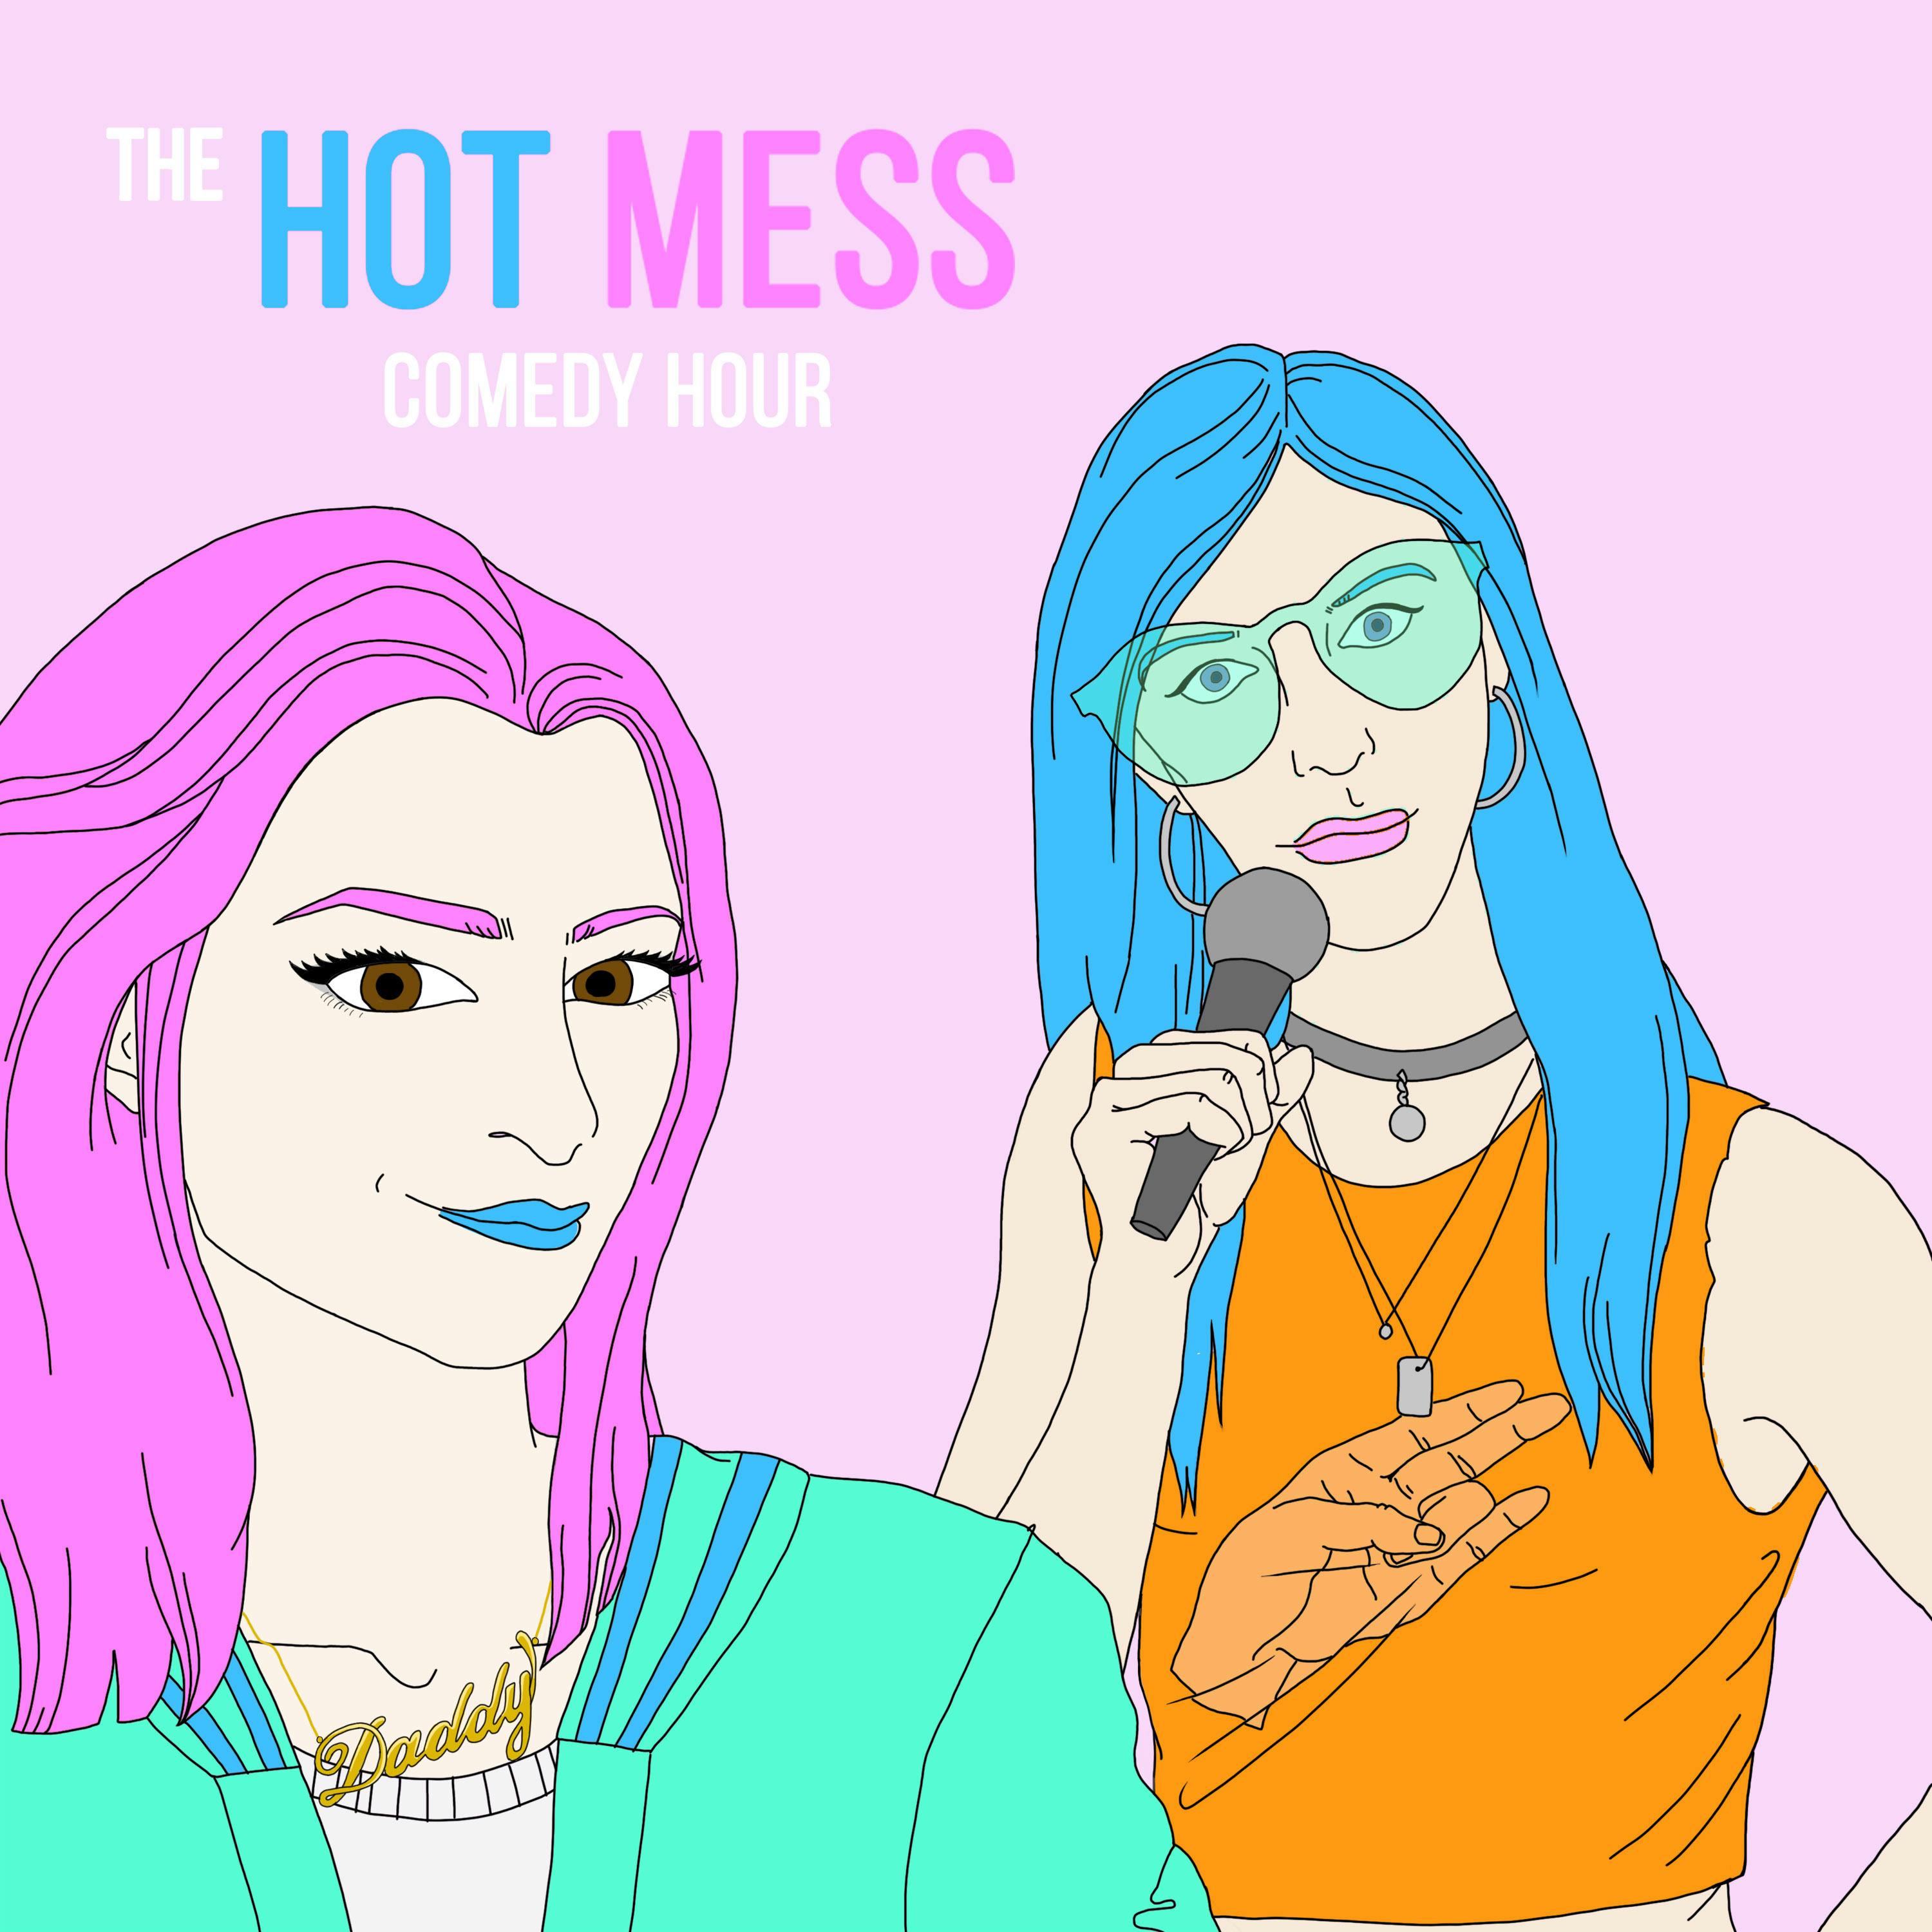 The Hot Mess Comedy Hour